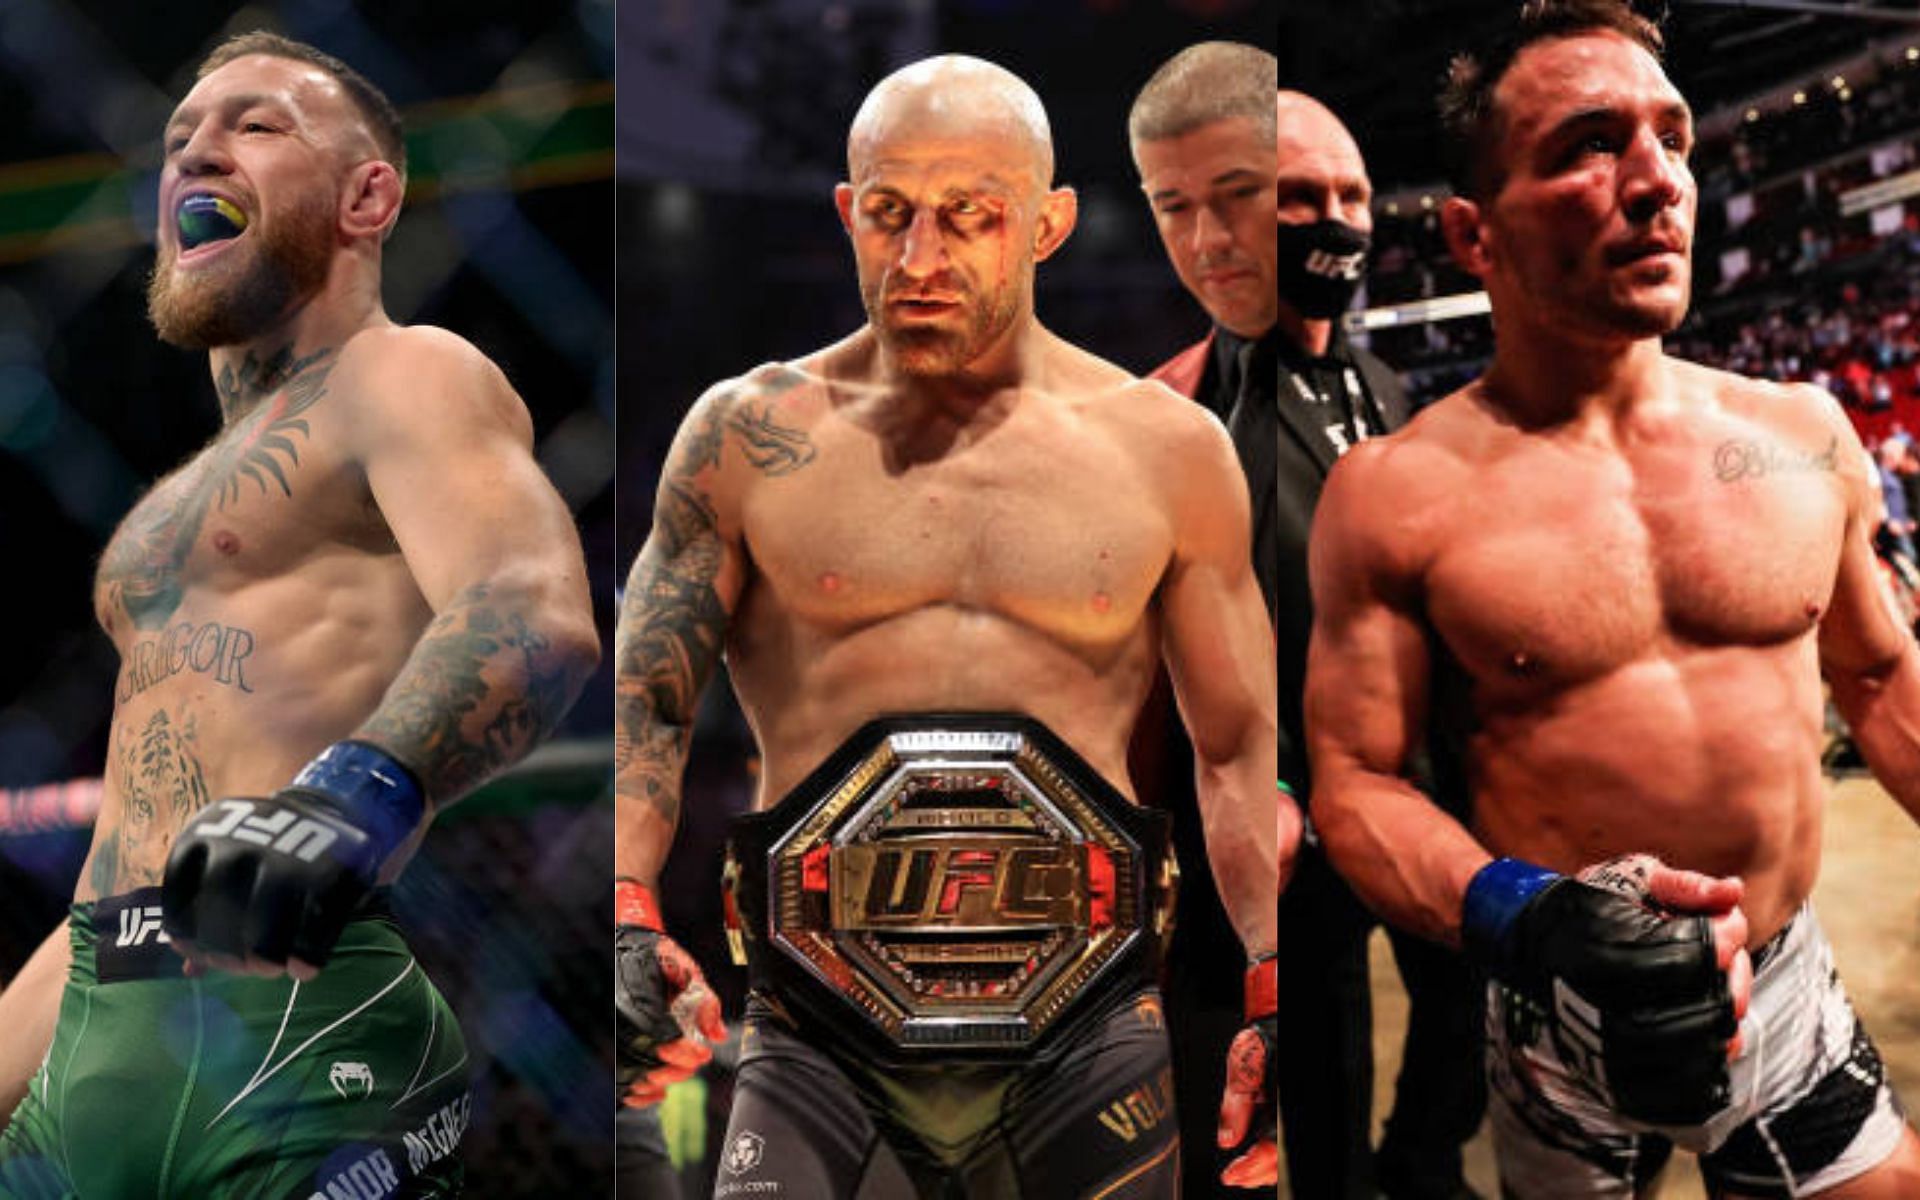 From left to right: Conor McGregor, Alexander Volkanovski, and Michael Chandler